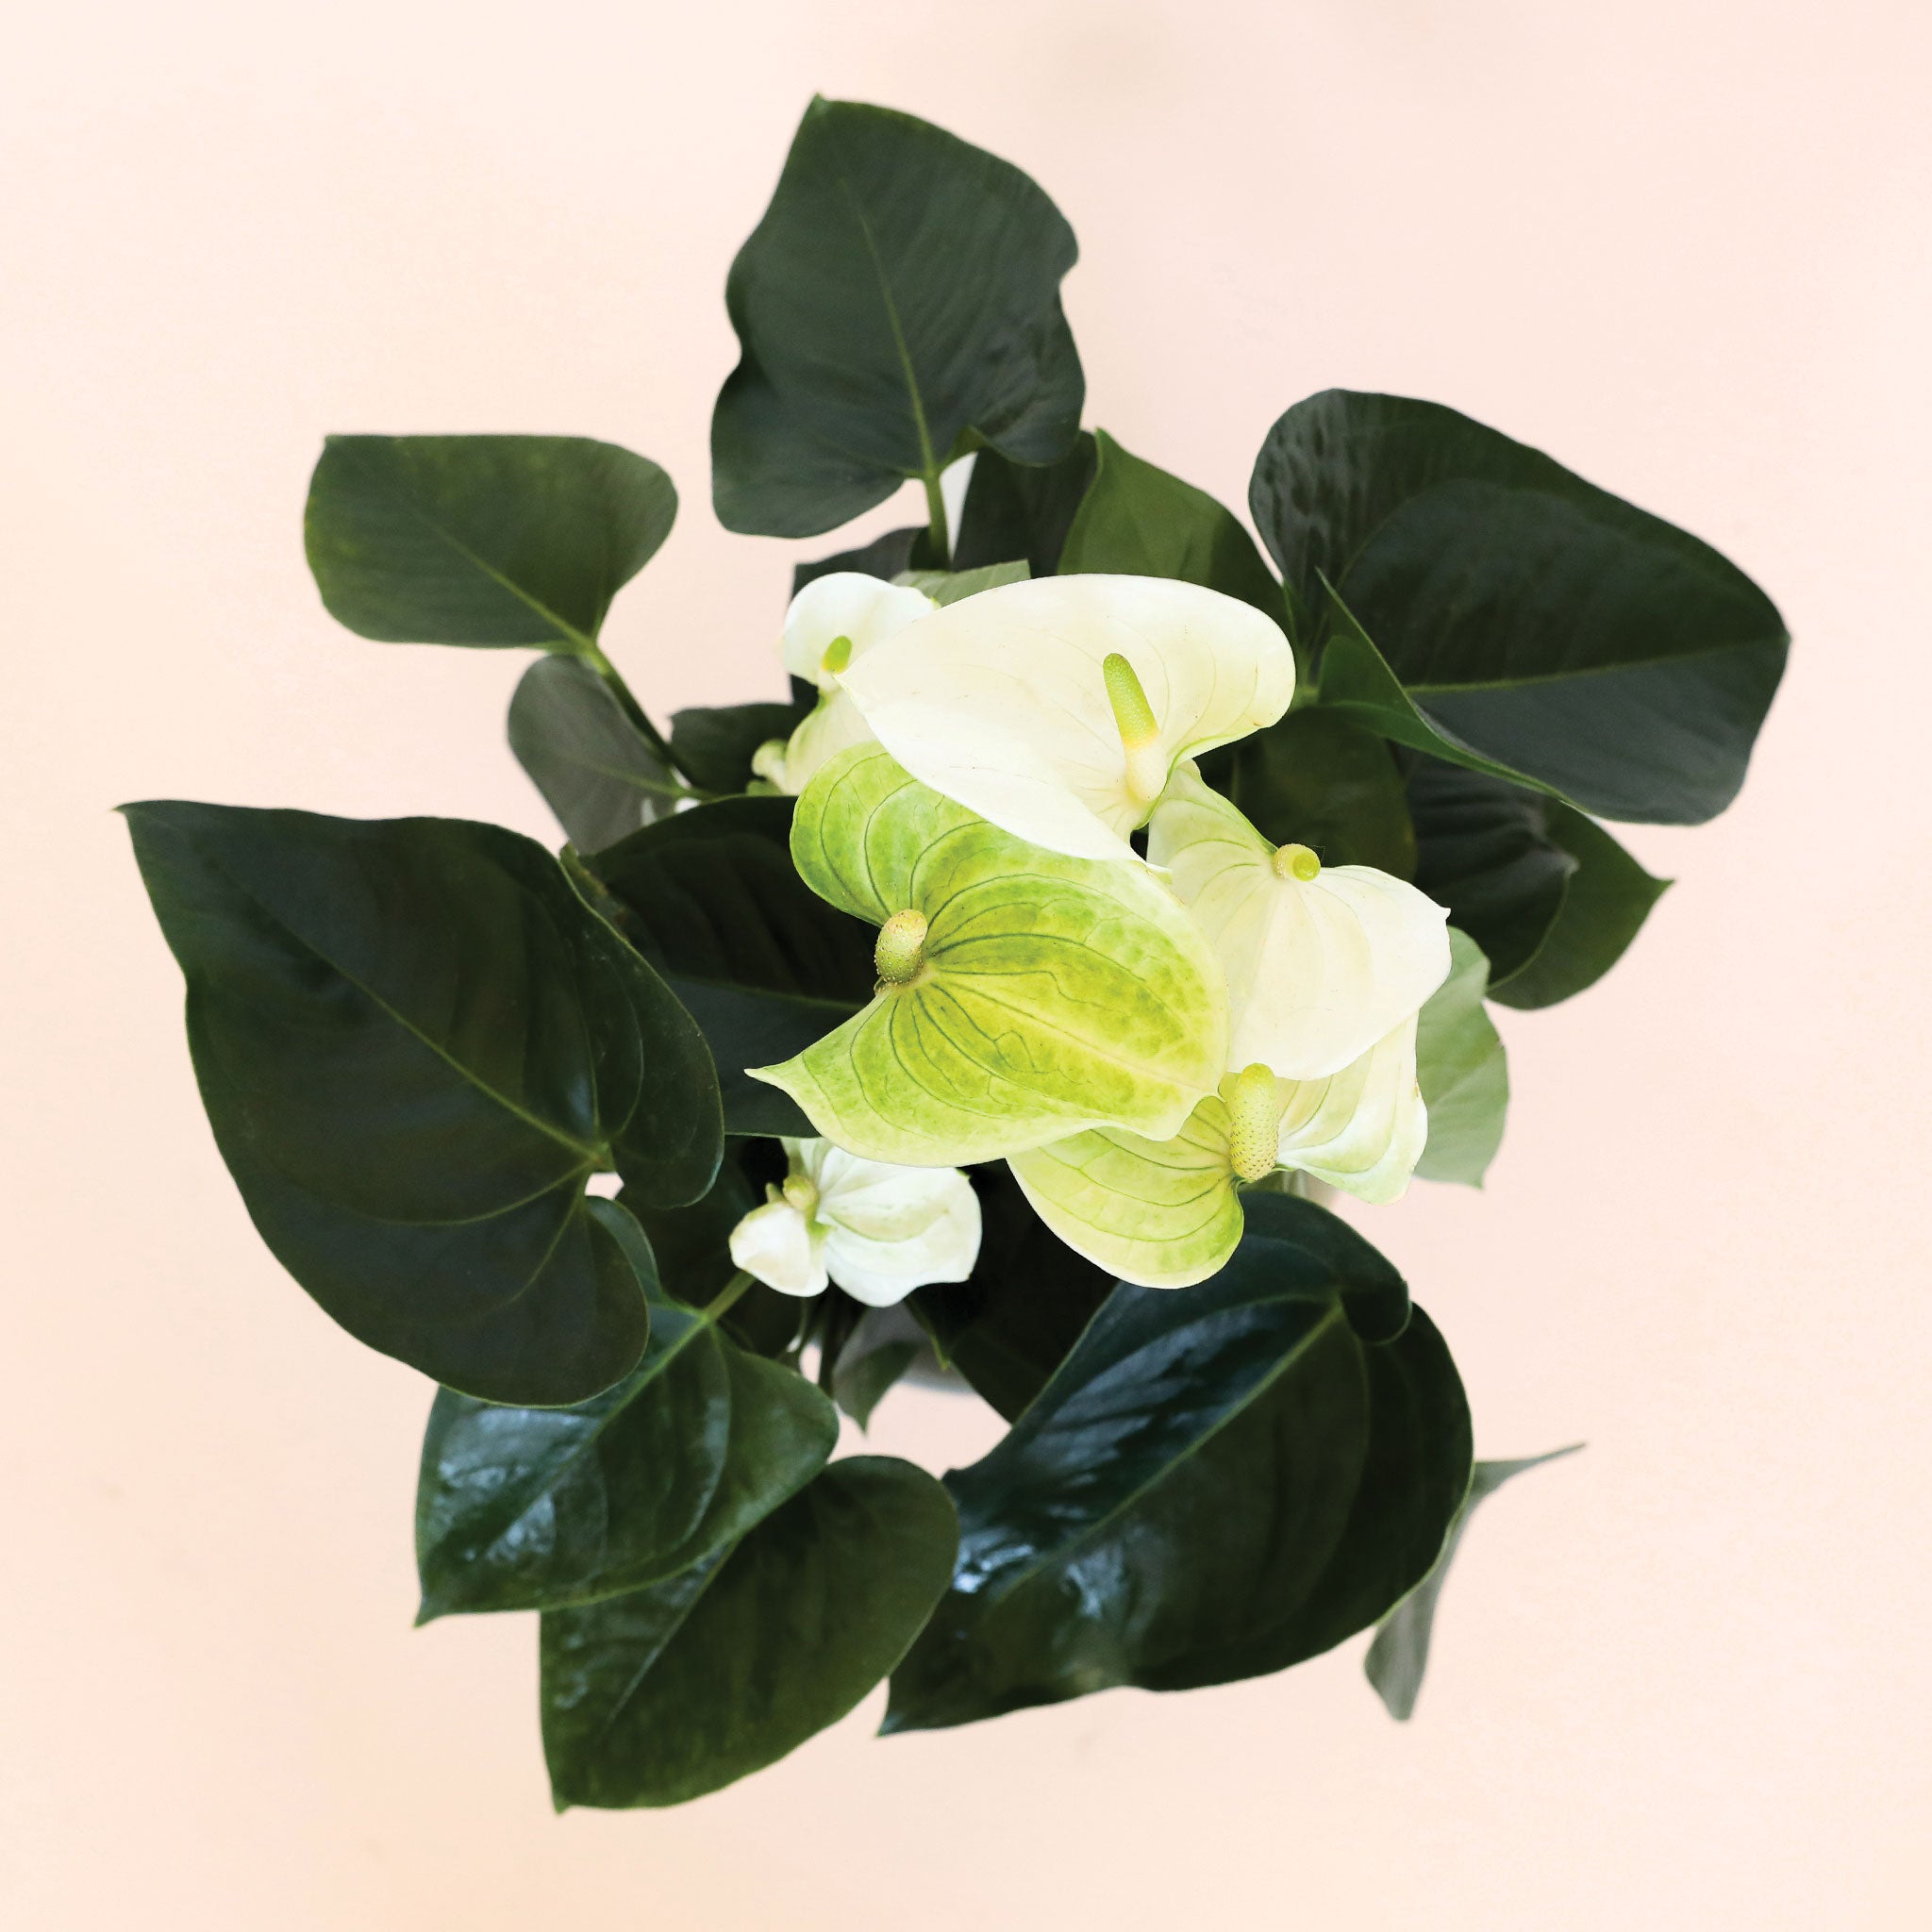 Top view of Anthurium White. Anthurium has dark spade shaped leaves and tall flat white petal flowers and white-green stamen.